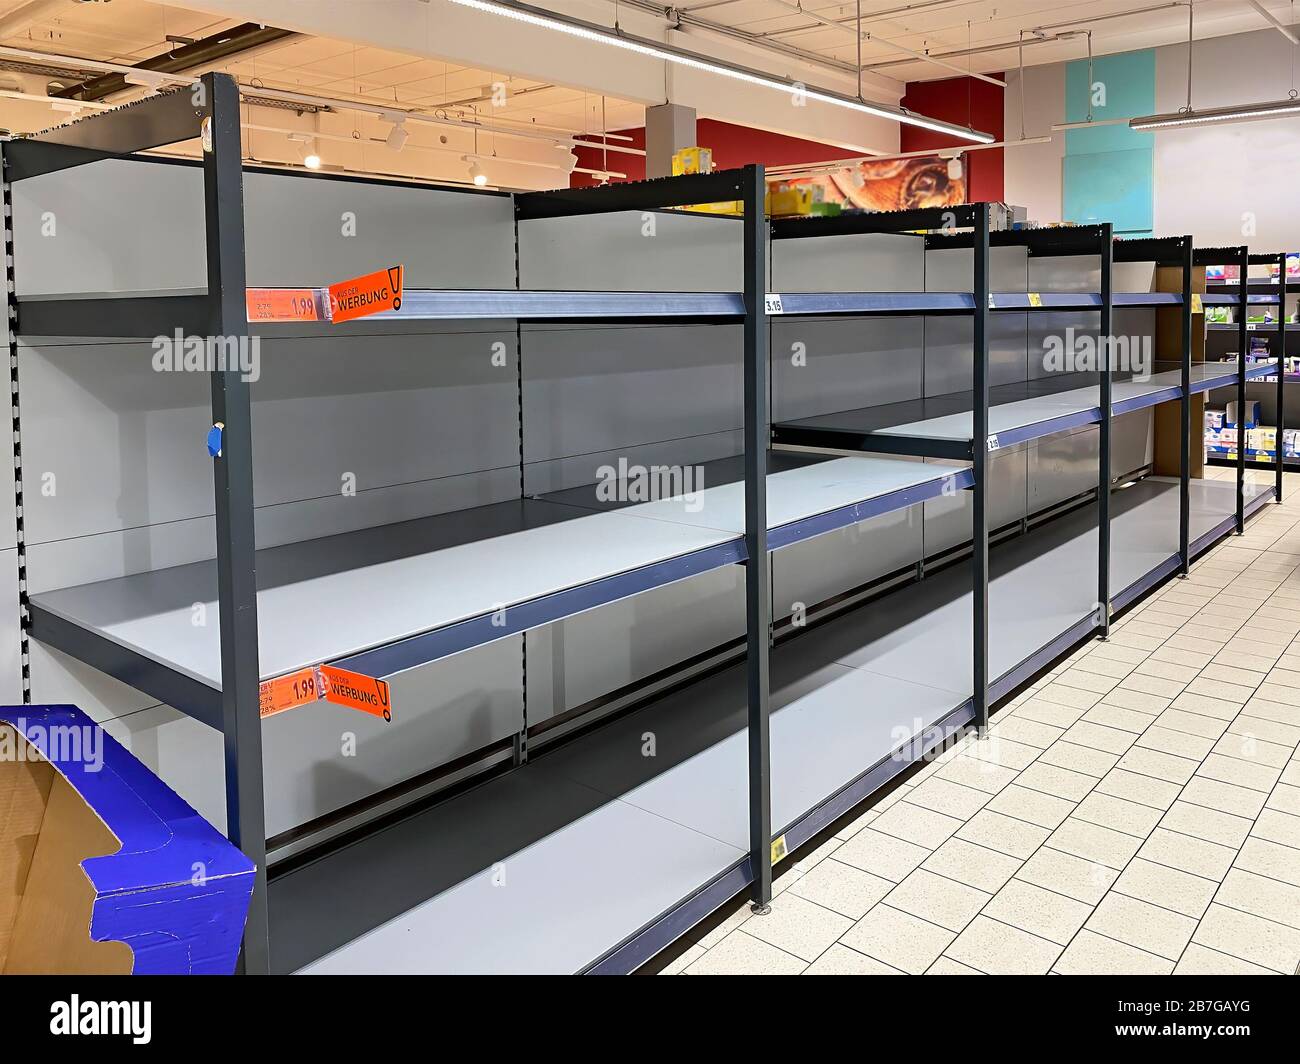 Sold Out Racks in a Supermarket, Coronavirus Crisis Stock Photo